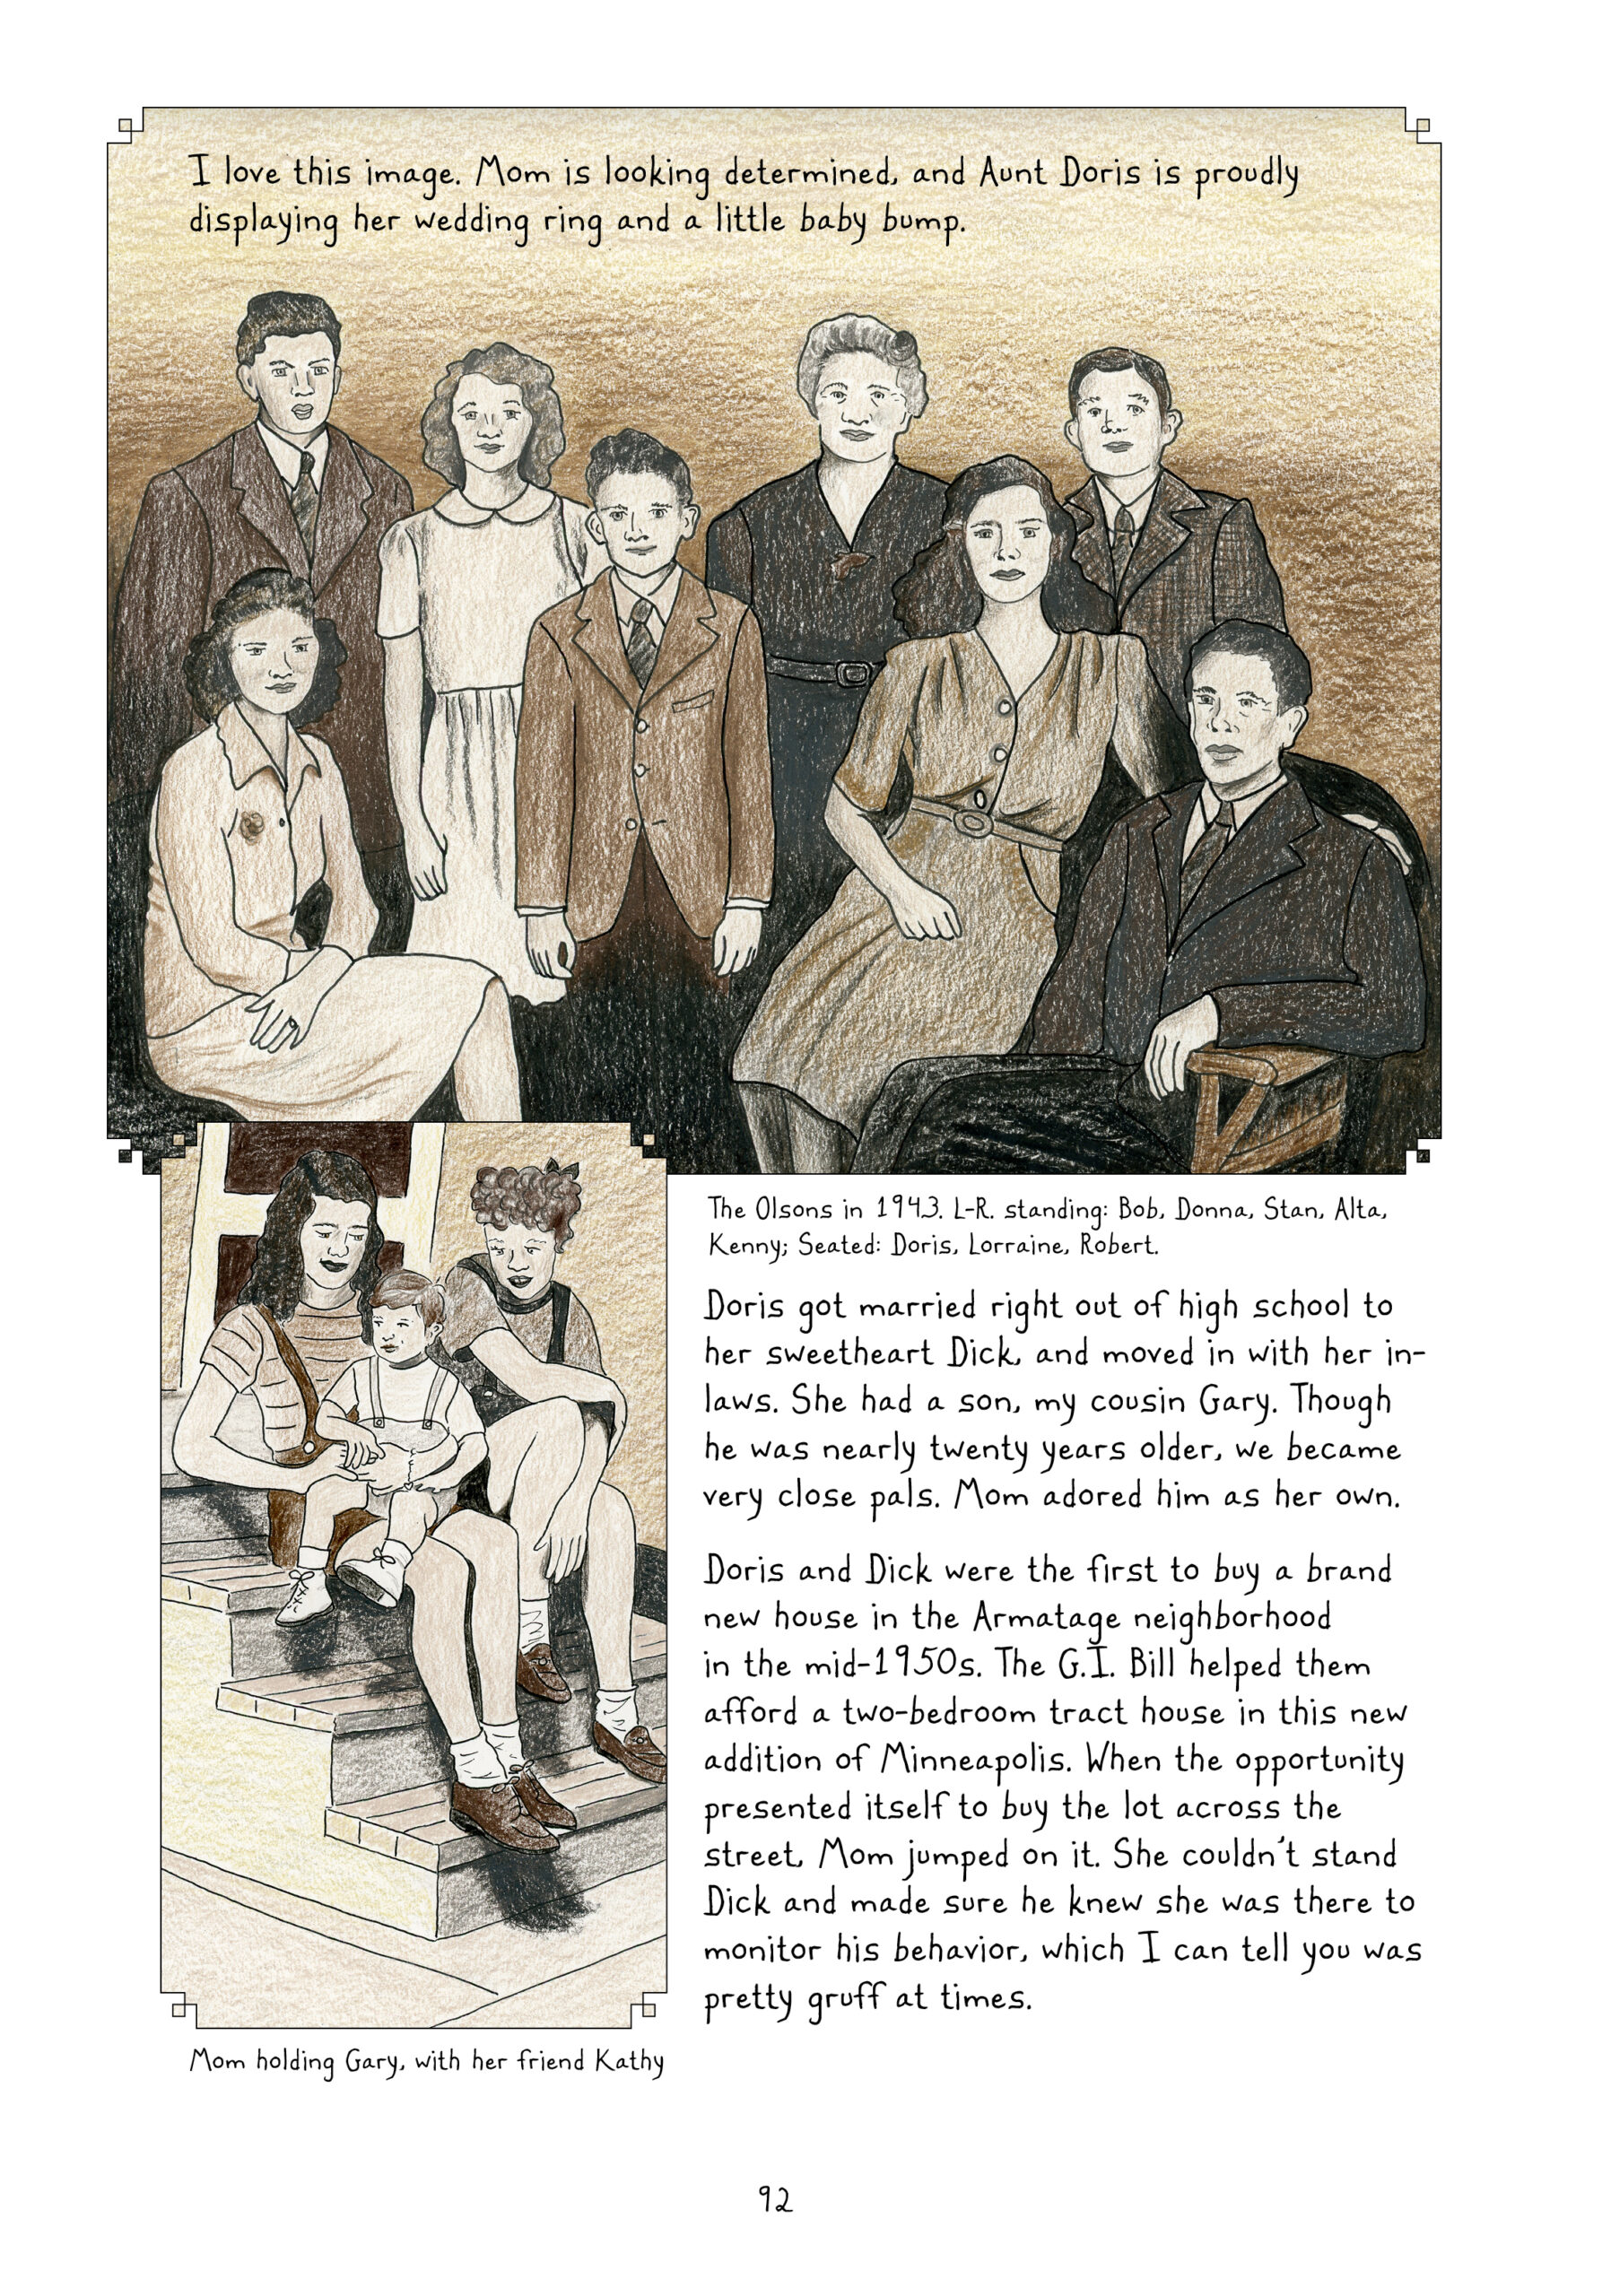 Two sepia-toned family photographs, with captions and narration by Lynn.

The upper half of the page is a drawn recreation of a sepia tone family photograph. Eight people pose stiffly for the camera. The back row includes, from left to right, a young man with short dark hair; a young woman with shoulder-length wavy hair; a younger boy; an older woman; and an adolescent boy with short brown hair gelled back. In the far left of the front row, a woman with shoulder-length, black curly hair sits down, facing the right of the picture but facing the camera. She rests her hands casually in her lap, showing off a wedding ring. Further to the right, another woman with longer, black curly hair sits on the arm of a chair, her arm resting on the shoulder of the man sitting in the chair. This man is the oldest male in the group, with close-cropped dark hair and wrinkle lines by his eyes. Everyone is dressed in formal wear, brown suits and ties for the men and dresses of different styles for the women. The boys/men all have slightly large ears. The three in the front row look rather serious, while the others have small smiles. Lynn narrates, â€œI love this image. Mom is looking determined, and Aunt Doris is proudly displaying her wedding ring and a little baby bump.â€ The caption at the bottom of the photo reads: â€œThe Olsons in 1943. L-R standing: Bob, Donna, Stan, Alta, Kenny; Seated: Doris, Lorraine, Robert.â€

A cropped photo, still sepia toned, takes up about a third of the lower half. It shows two teenage-looking girls sitting on the front steps of a house; one of the girls, a young Lorraine, holds a toddler-sized boy in her lap. The girl next to her has short, curly hair pulled up with a bow in the back. She has one knee on a higher step and rests her elbow on it, sitting casually and looking down at the boy with fondness. The boy looks off to the side with a neutral expression. All three of them are wearing short-sleeve shirts and overall shorts of different colors and styles. The photo is captioned, â€œMom holding Gary, with her friend Kathy.â€ 

Lynn continues narrating, â€œDoris got married right out of high school to her sweetheart Dick, and moved in with her in-laws. She had a son, my cousin Gary. Though he was nearly twenty years older, we became very close pals. Mom adored him as her own. Doris and Dick were the first to buy a brand new house in the Armatage neighborhood in the mid-1950s. The G.I. Bill helped them afford a two-bedroom tract house in this new addition of Minneapolis. When the opportunity presented itself to buy the lot across the street, Mom jumped on it. She couldnâ€™t stand Dick and made sure he knew she was there to monitor his behavior, which I can tell you was pretty gruff at times.â€